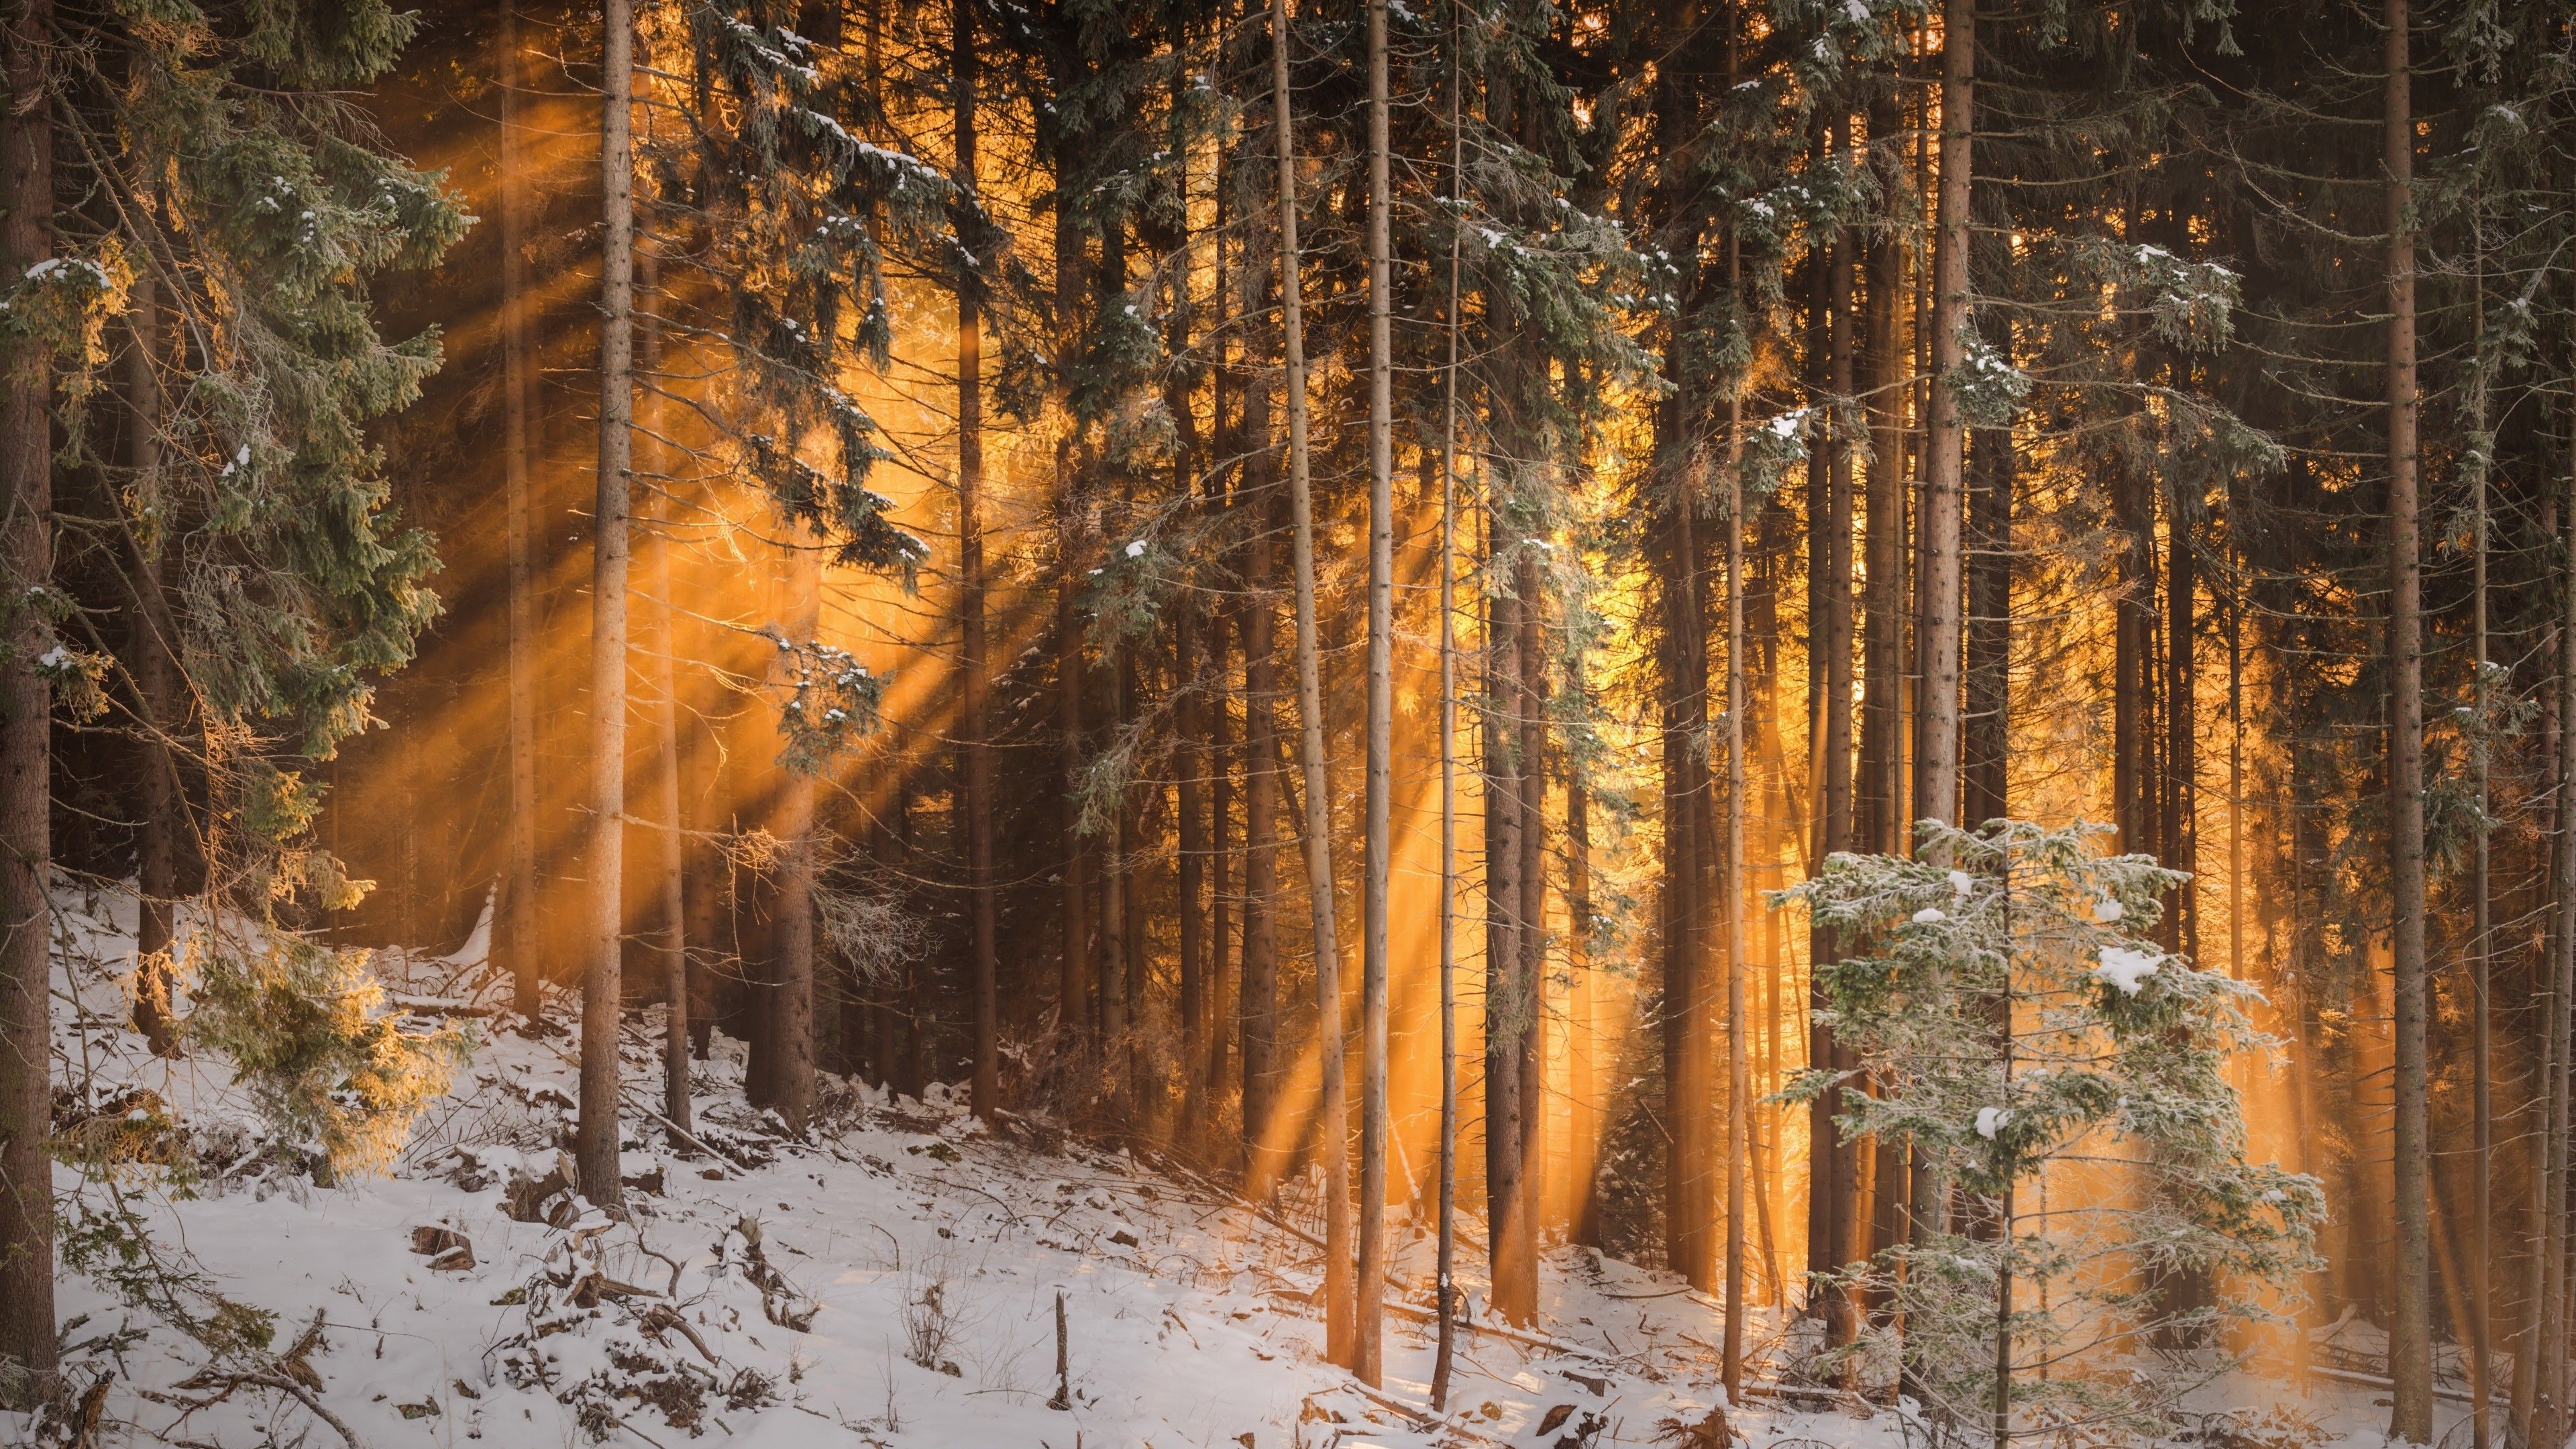 Download 3840x2160 Sunrays, Forest, Winter, Trees Wallpaper for UHD TV